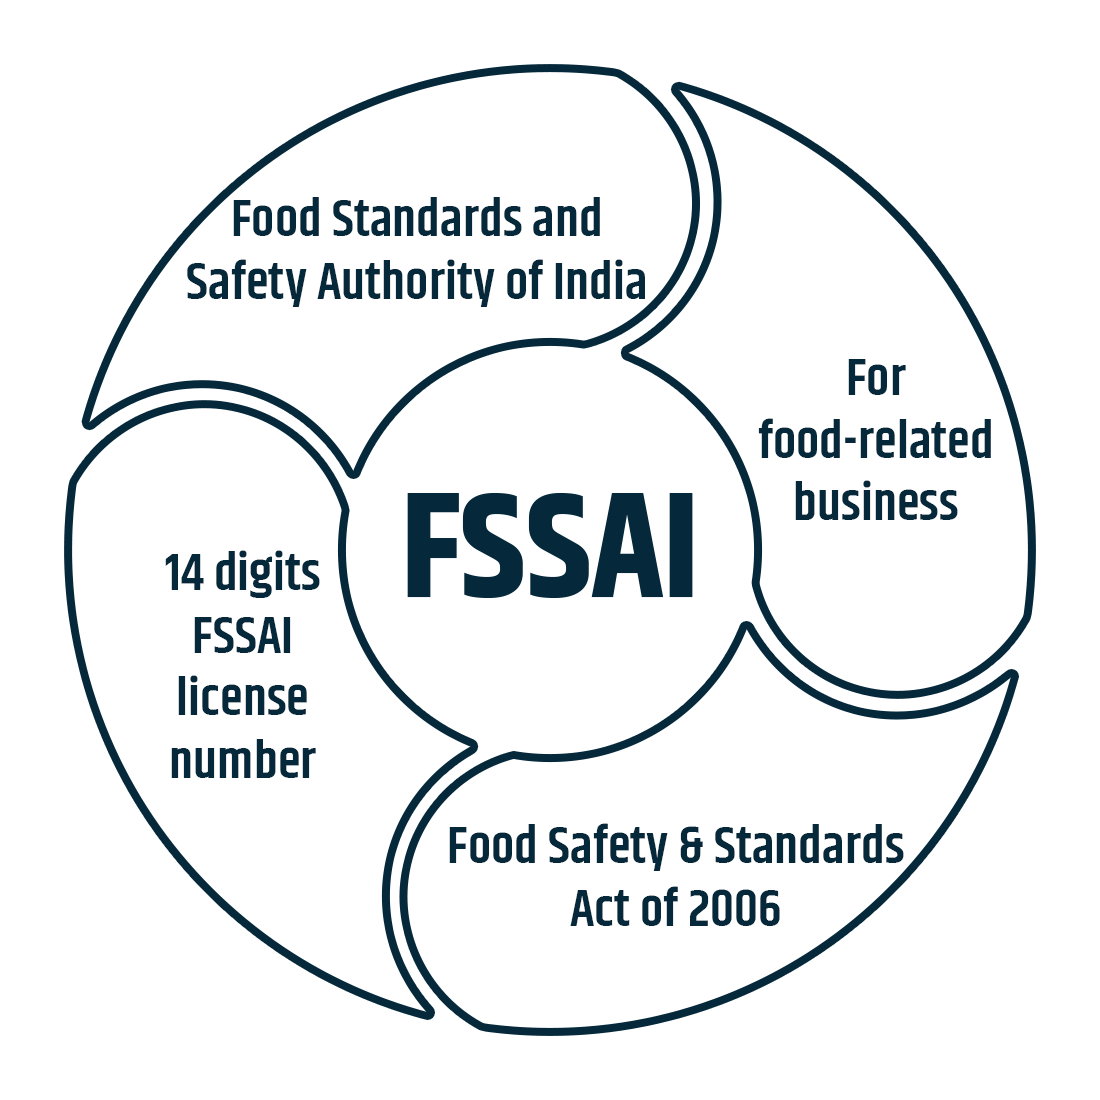 Food standards and safet authority of india